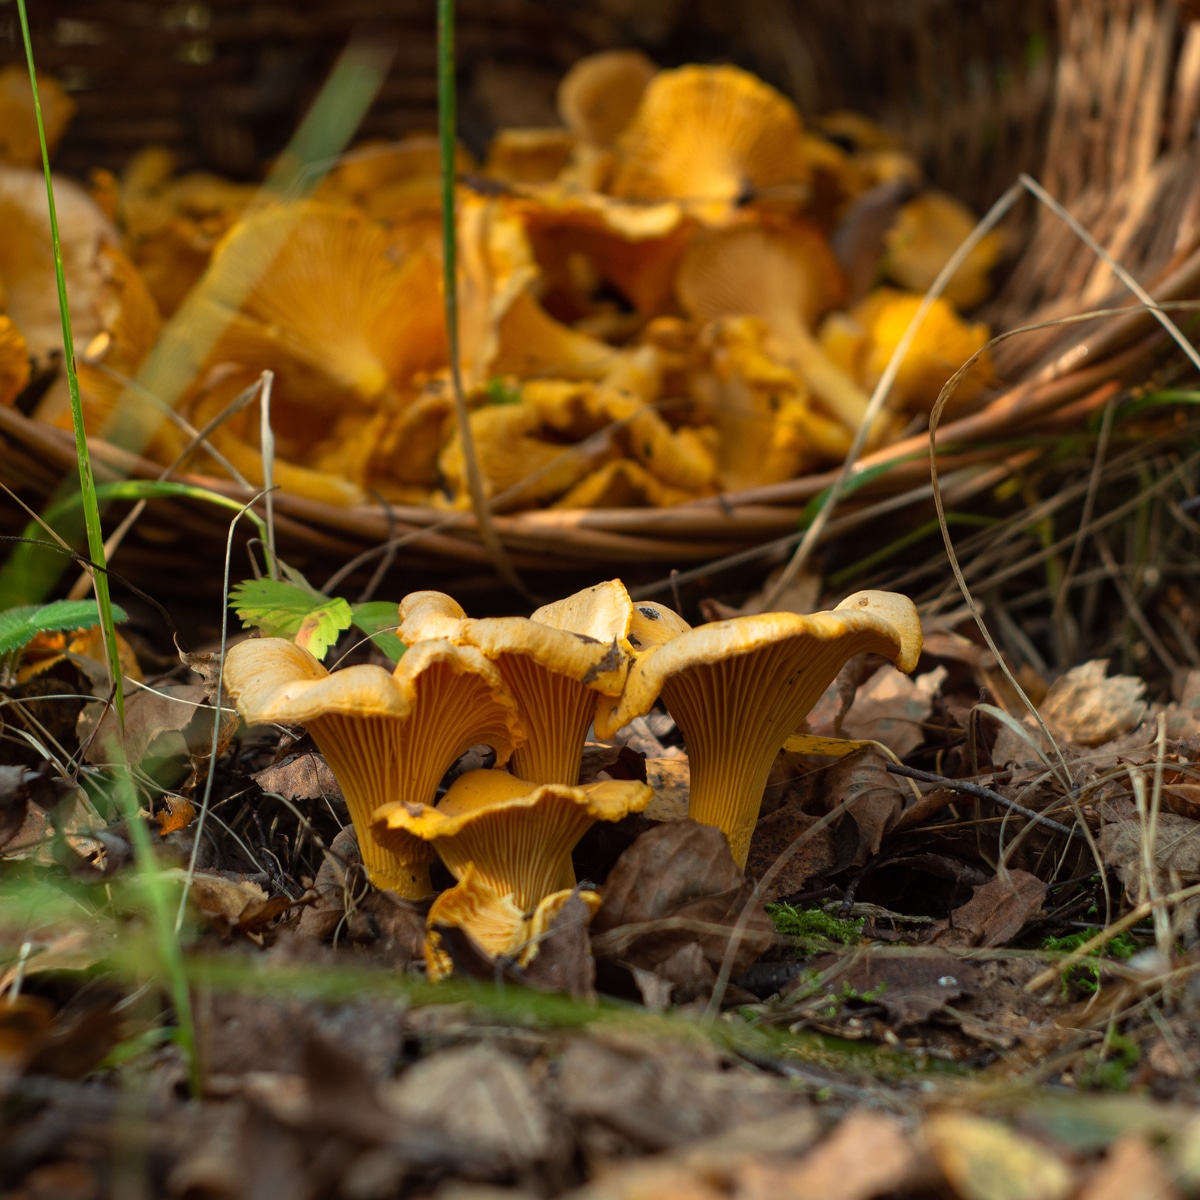 golden chanterelles in ground and basket